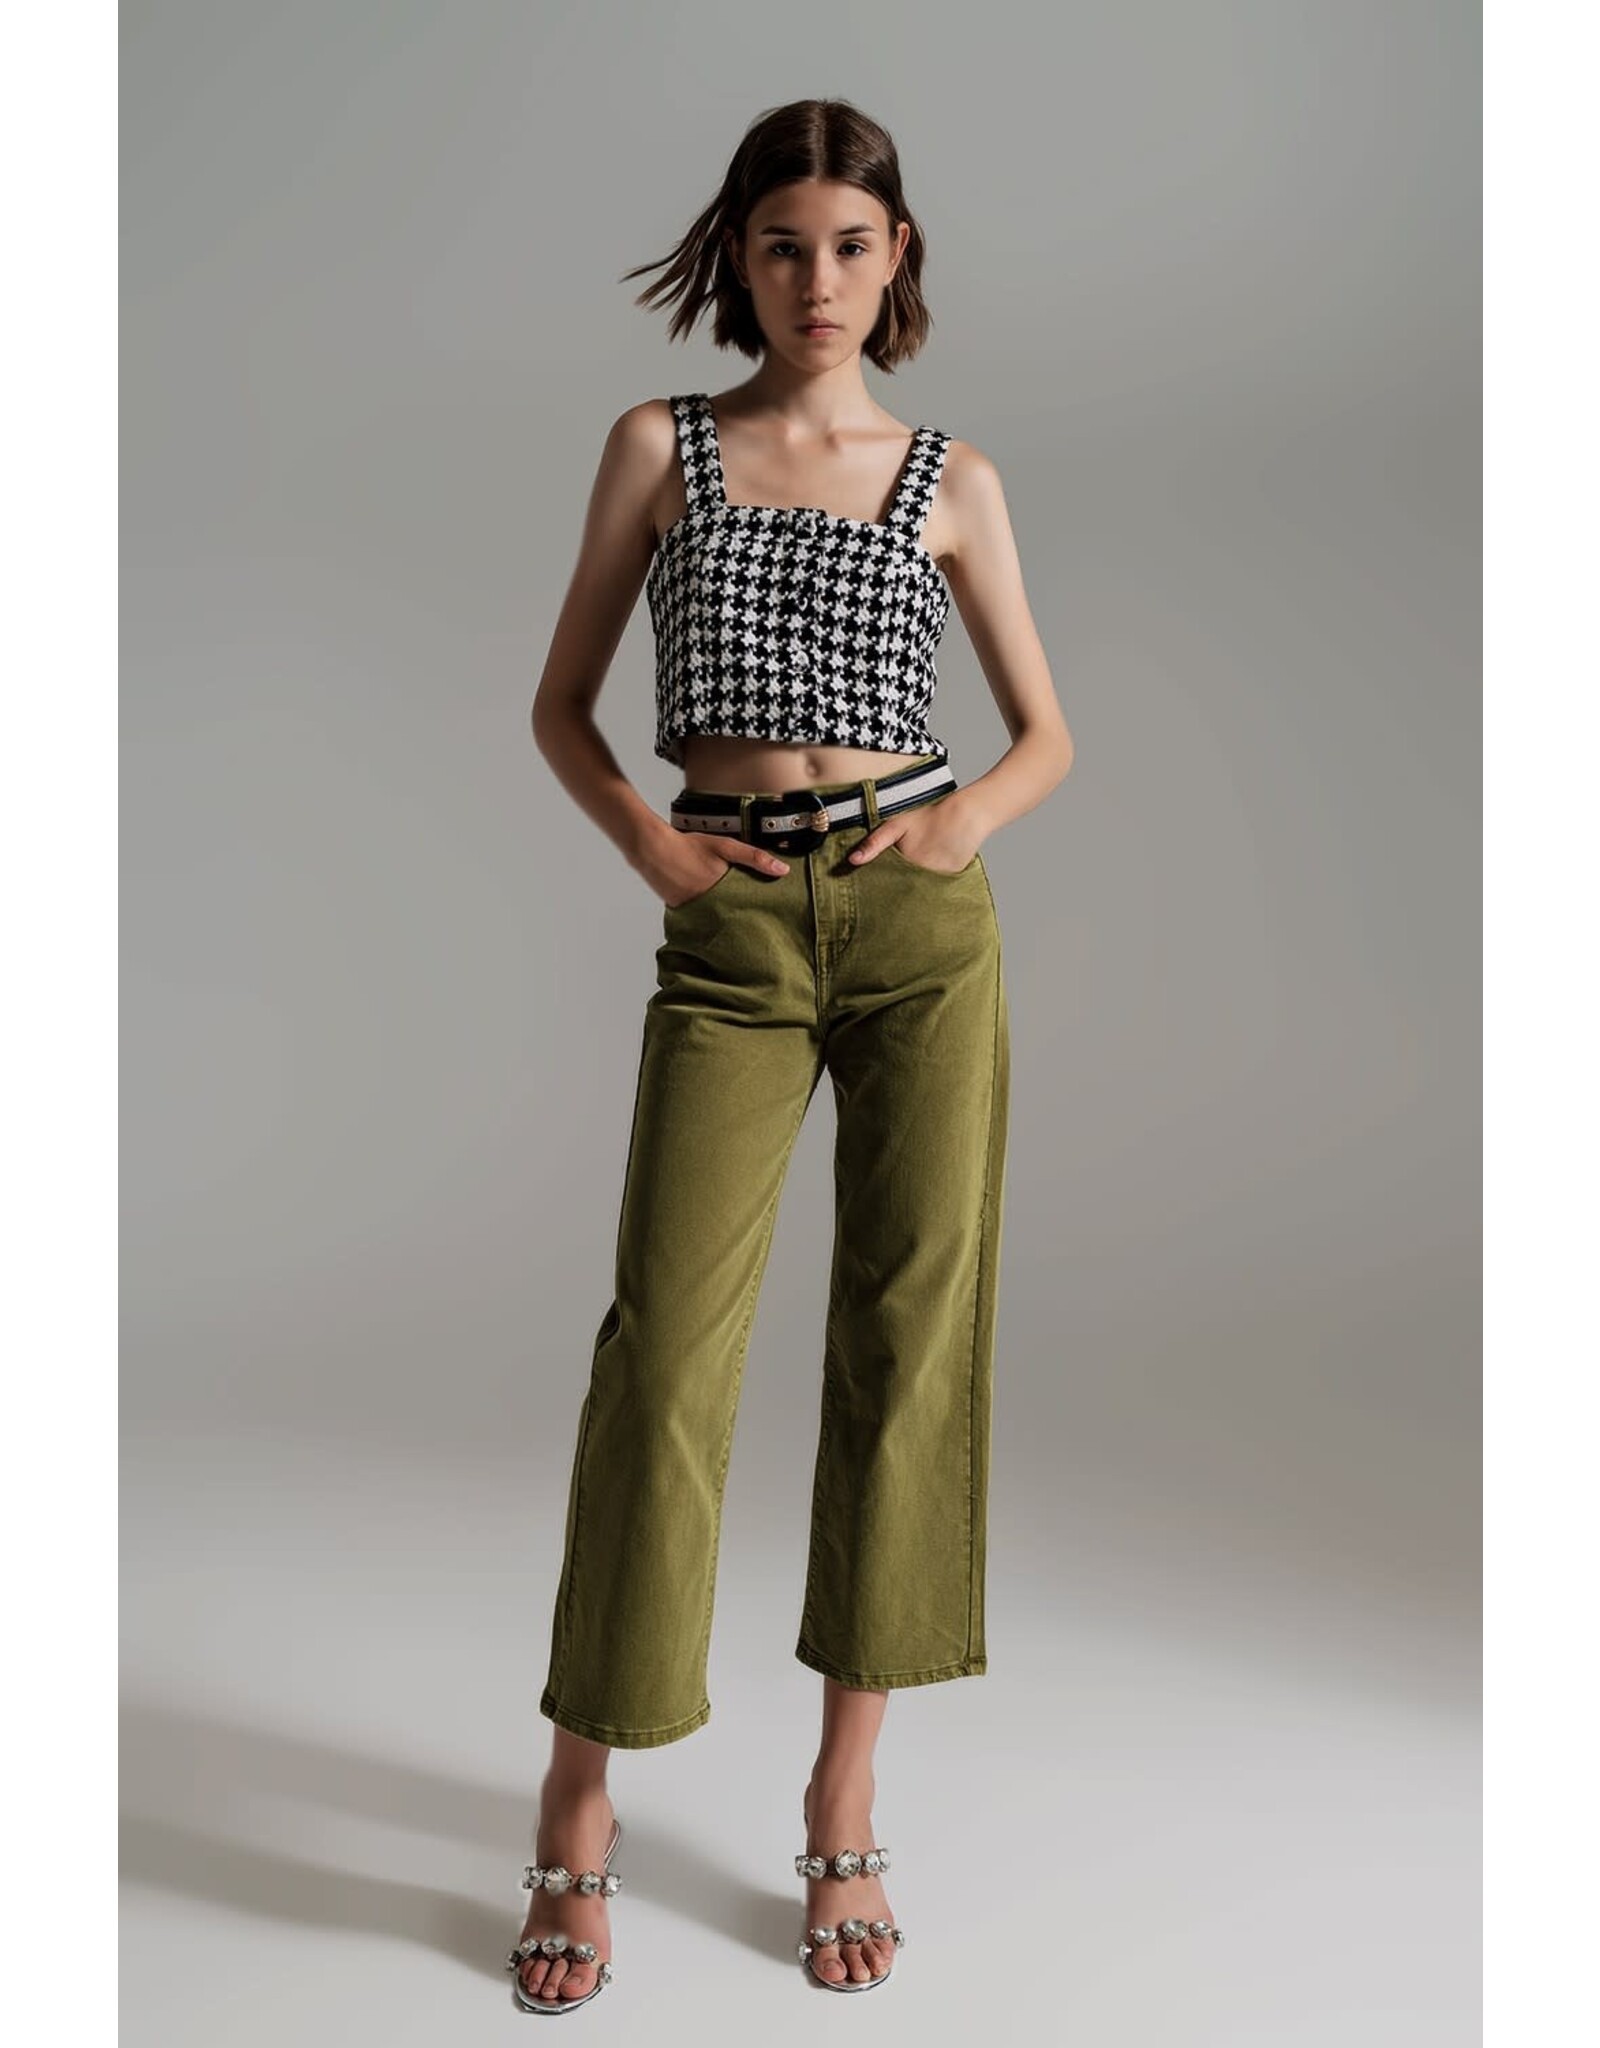 Q2 Cropped Wide Leg Pants in Olive Green